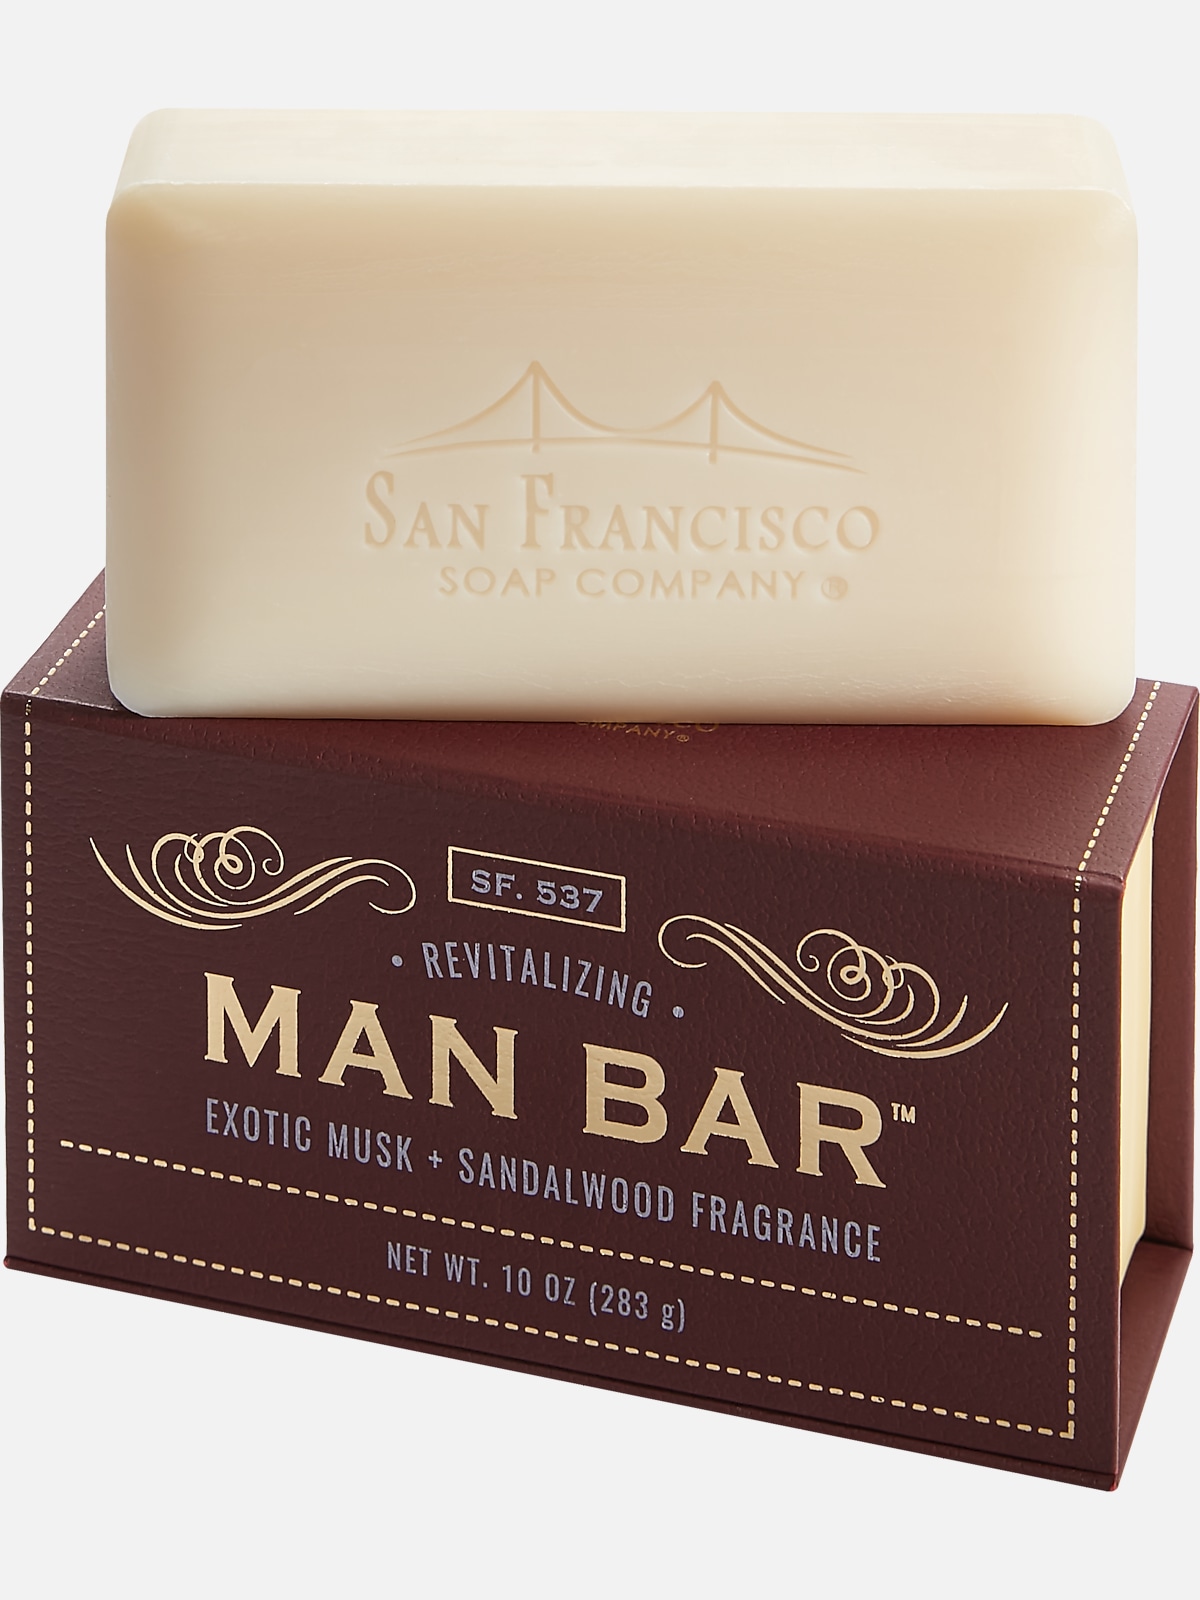 https://image.menswearhouse.com/is/image/TMW/TMW_8X8D_00_SAN_FRANCISCO_SOAP_CO_SKIN_BODY_CARE_MUSK_SOAP_MAIN?imPolicy=pdp-zoom-mob